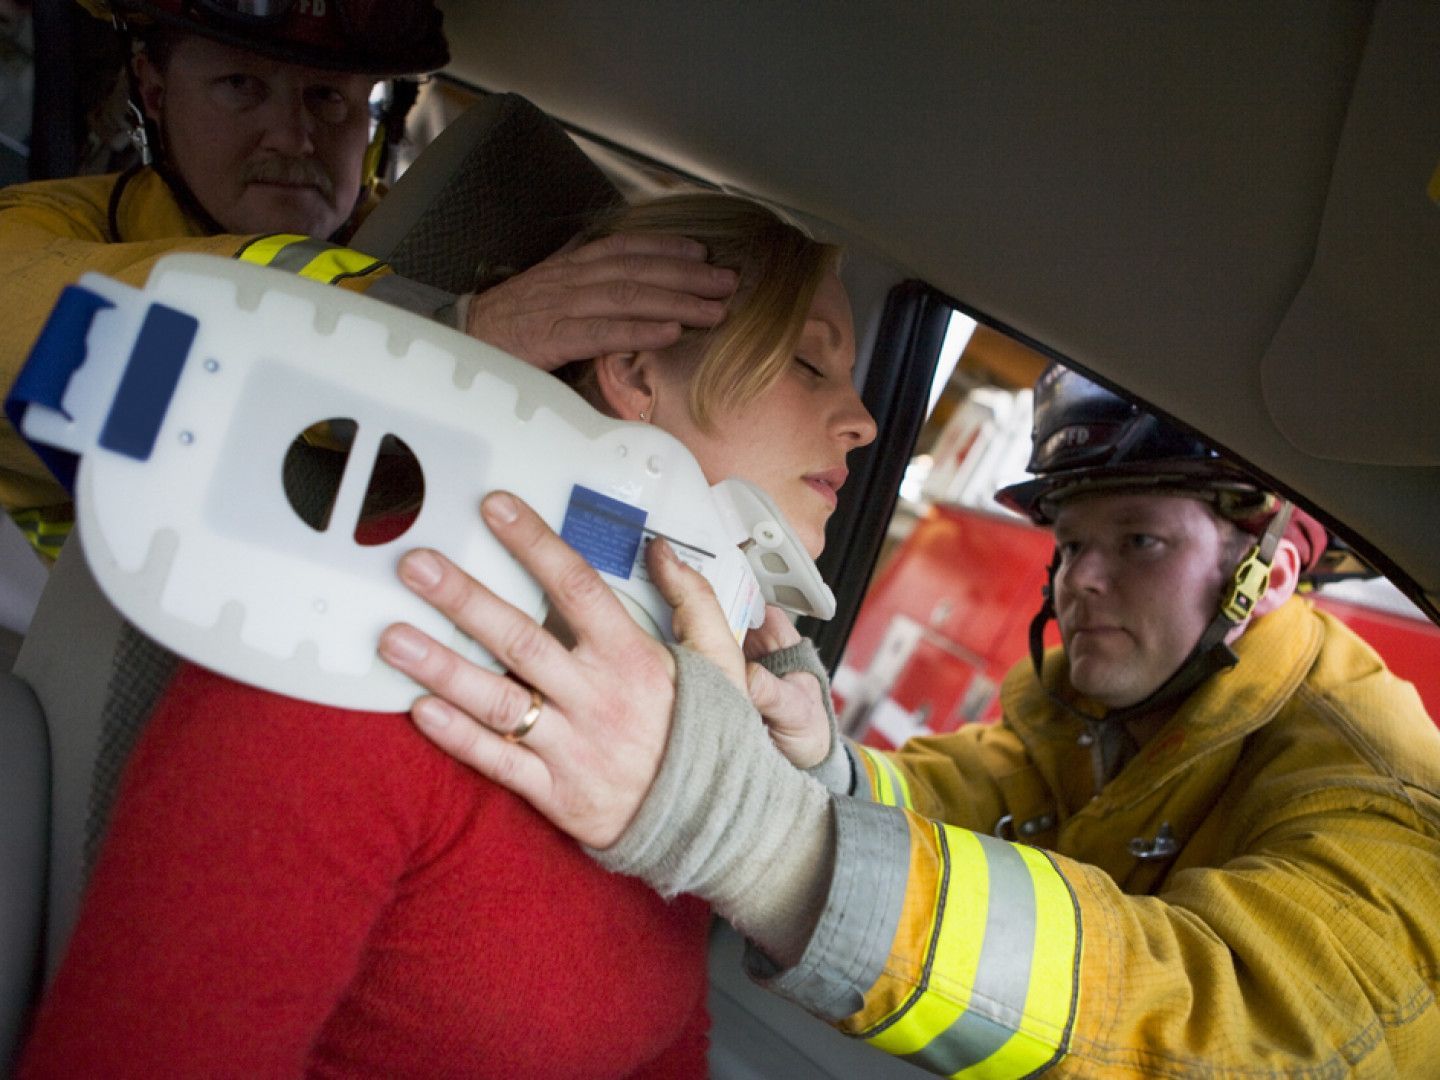 Firefighters Saving an Injured Woman in Car